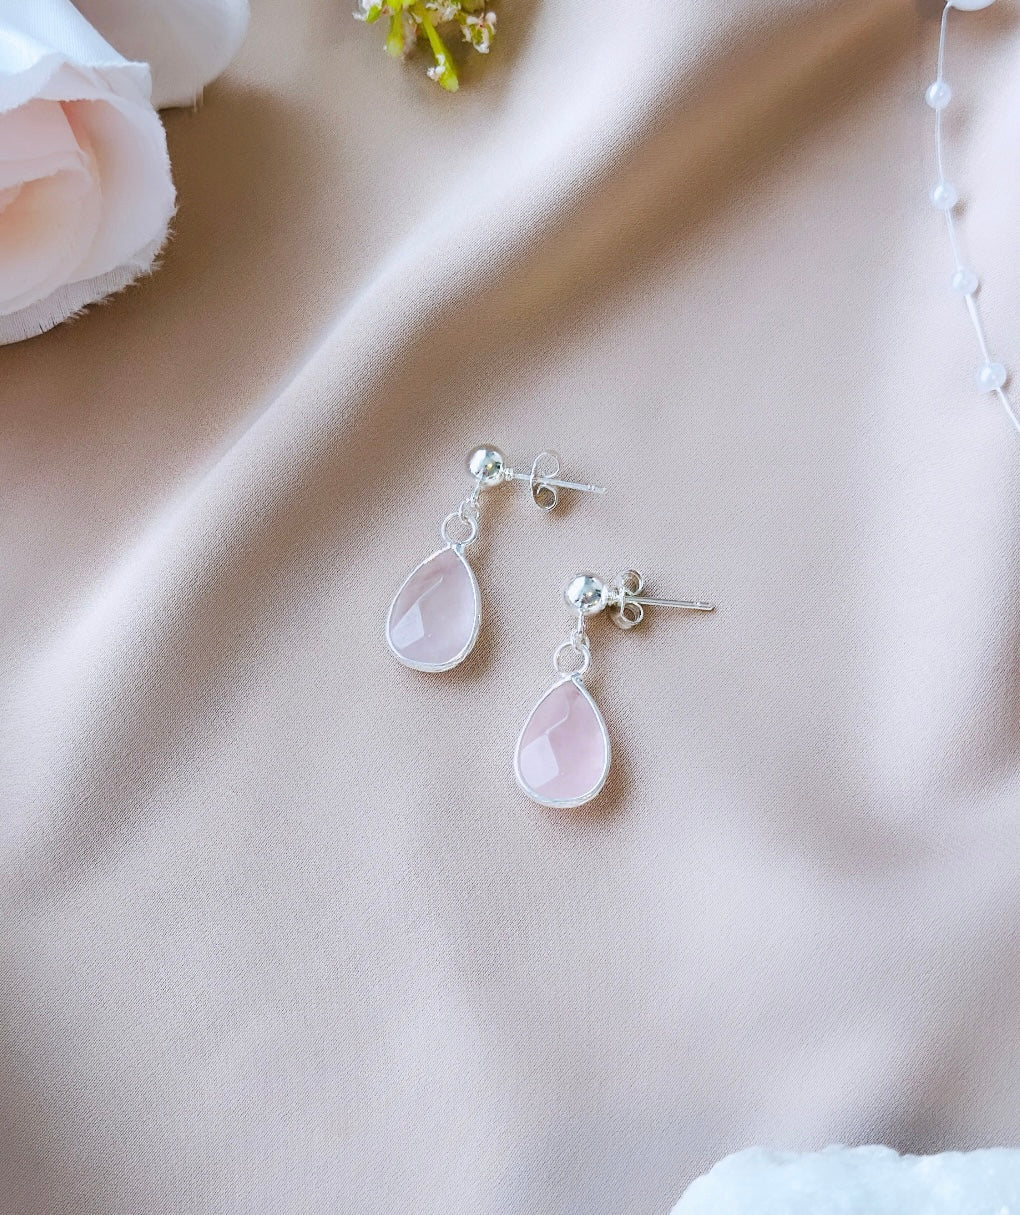 Elevate your style with the Bella Earrings, featuring exquisite Sterling Silver craftsmanship and adorned with Rose Quartz droplet gemstones.